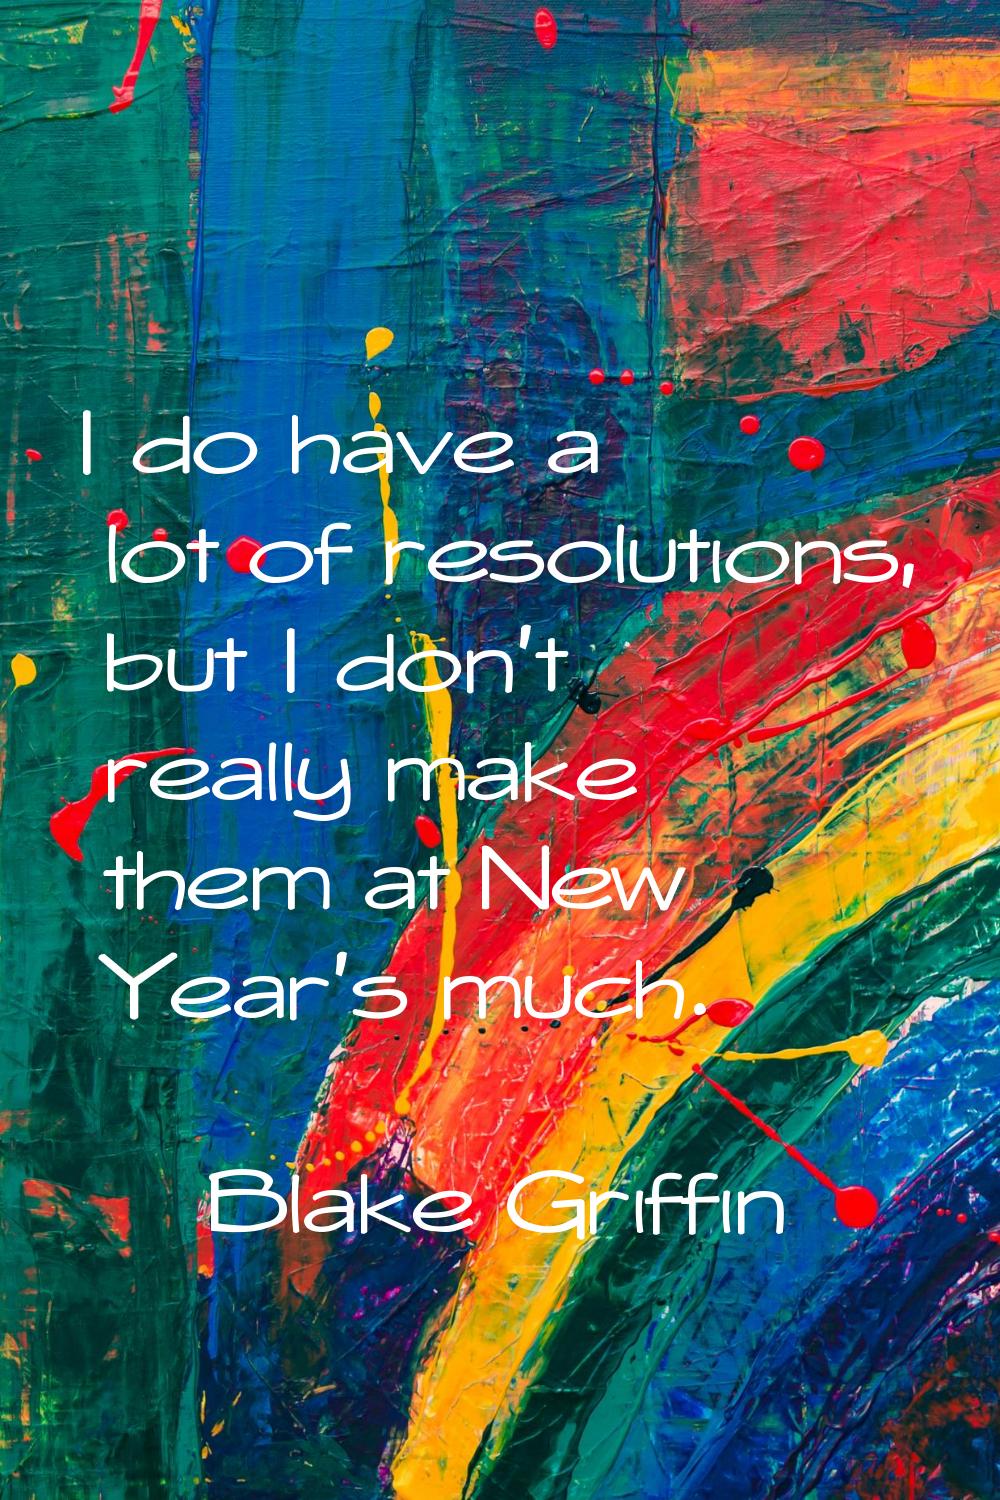 I do have a lot of resolutions, but I don't really make them at New Year's much.